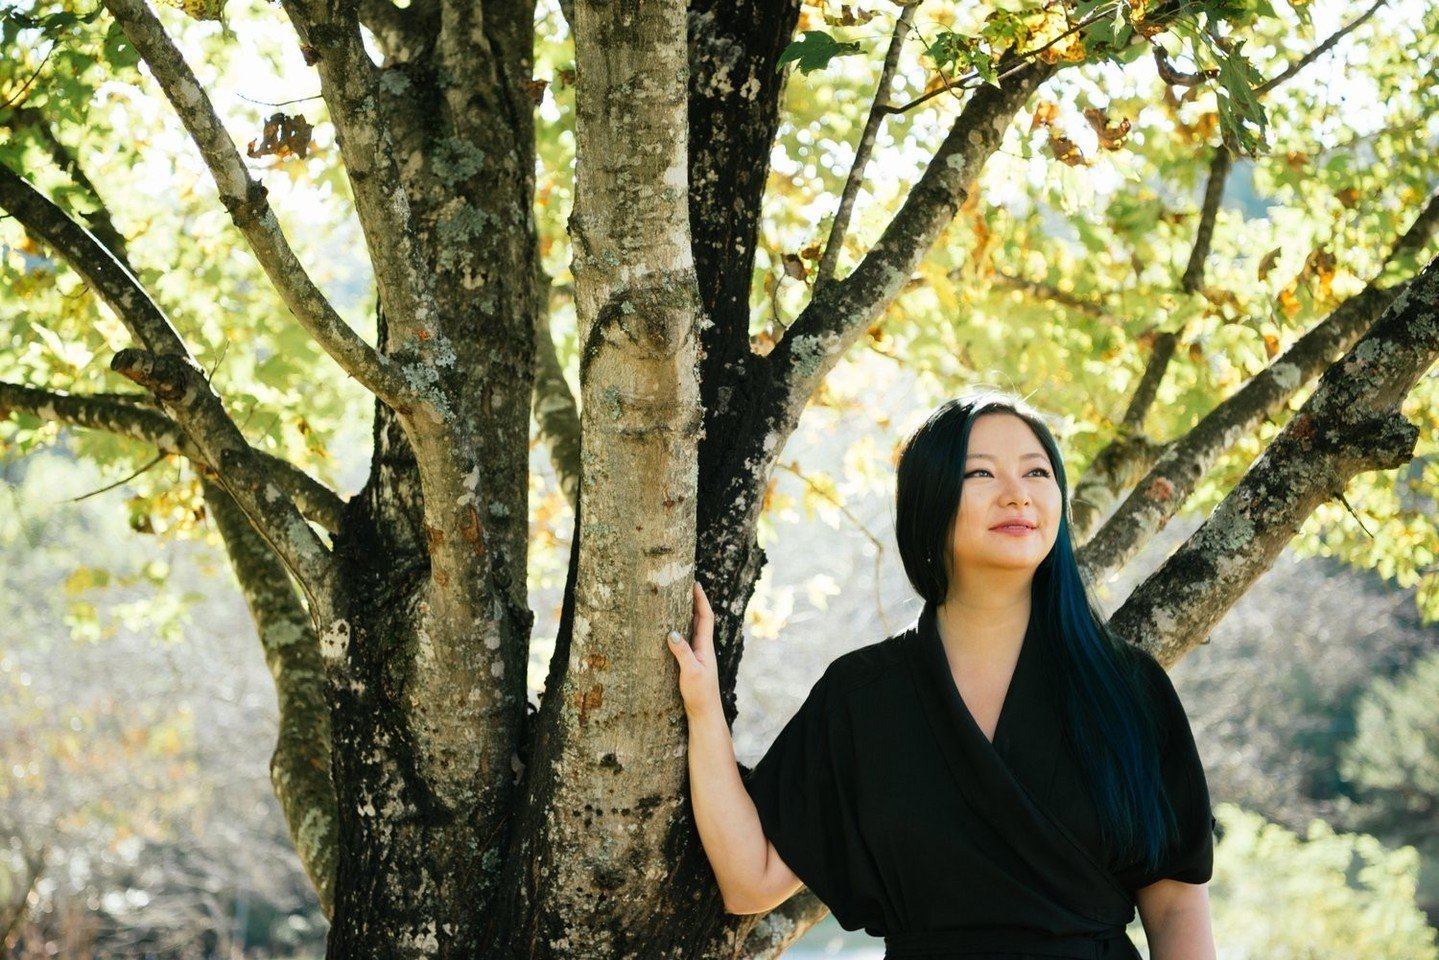 Pianist Vicky Chow finds freedom in &ldquo;therapeutic&rdquo; Philip Glass &Eacute;tudes.⁠
⁠
Acclaimed Brooklyn-based musician returns to perform Book 2 of the composer&rsquo;s works for solo piano in @MusiconMain concert on May 28.⁠
⁠
Head to Stir t